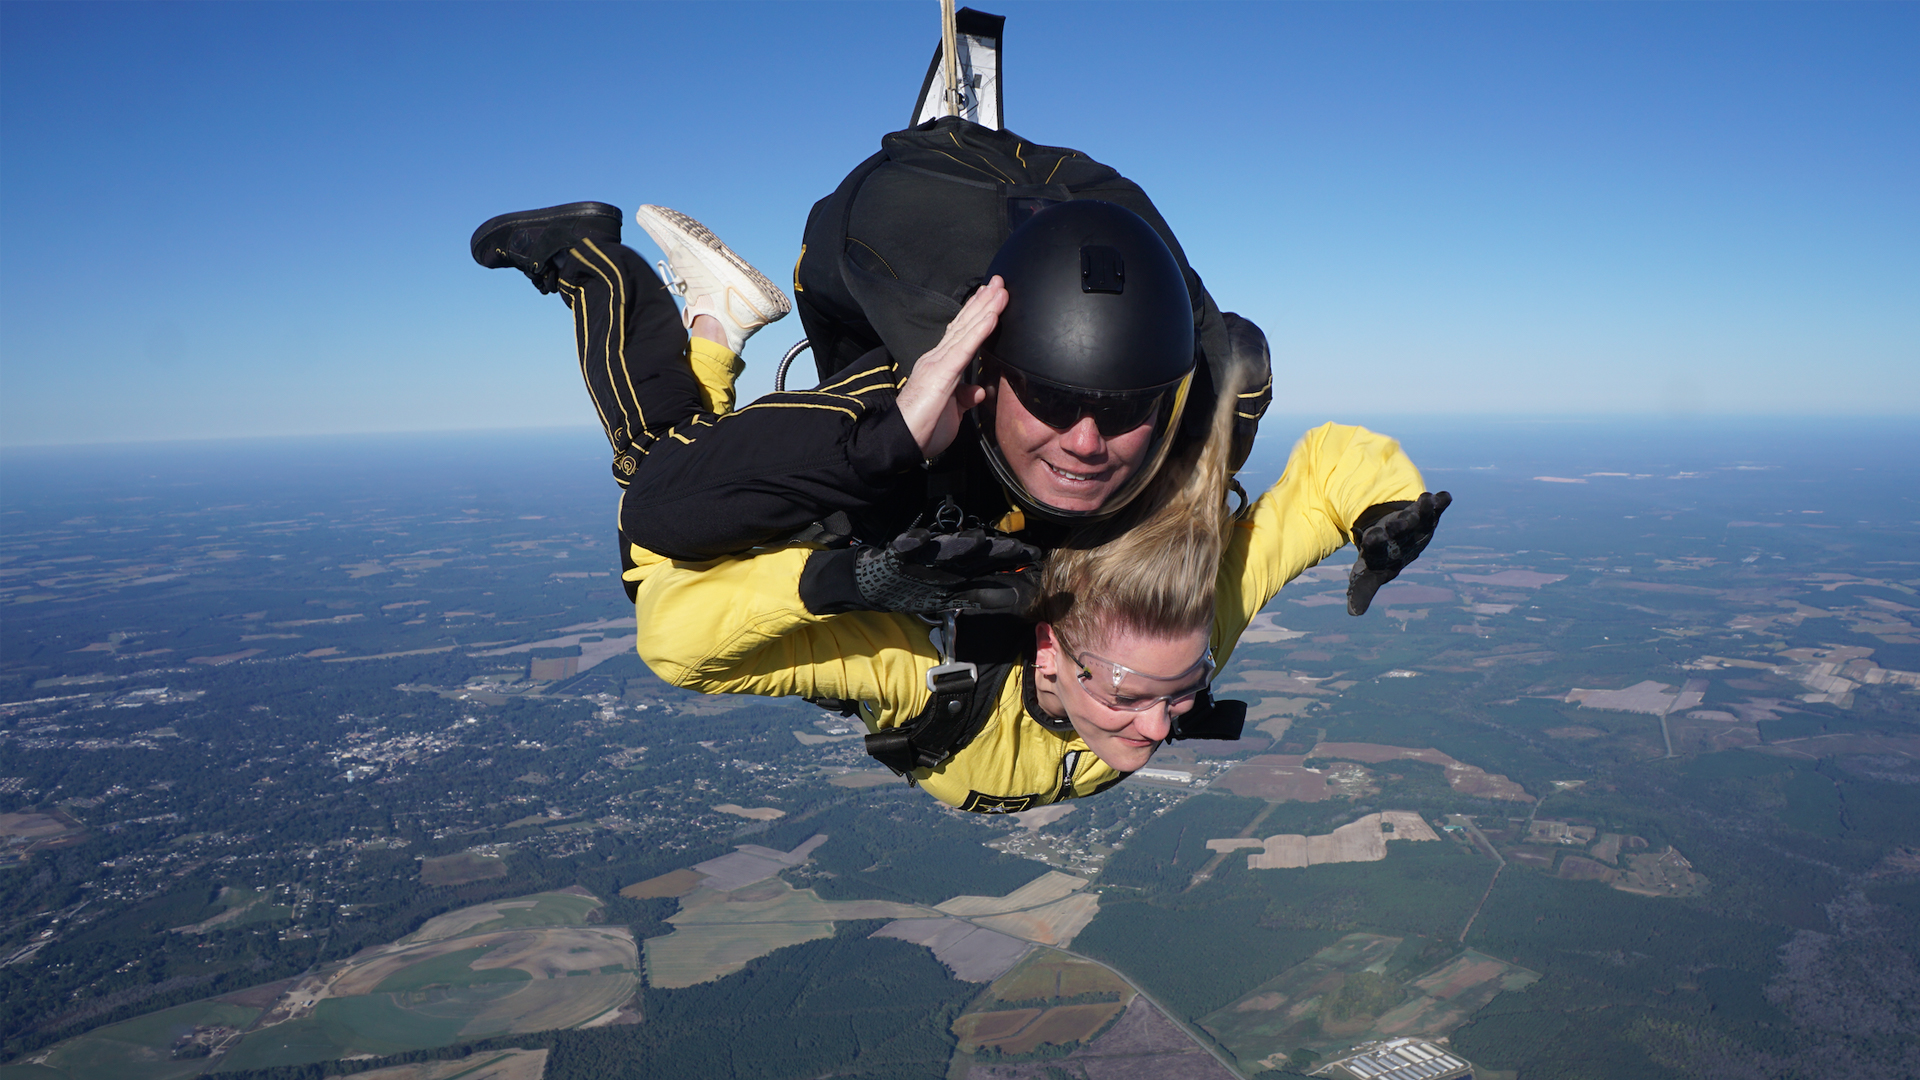 US Army Golden Knights: What it's like jumping with top paratroopers